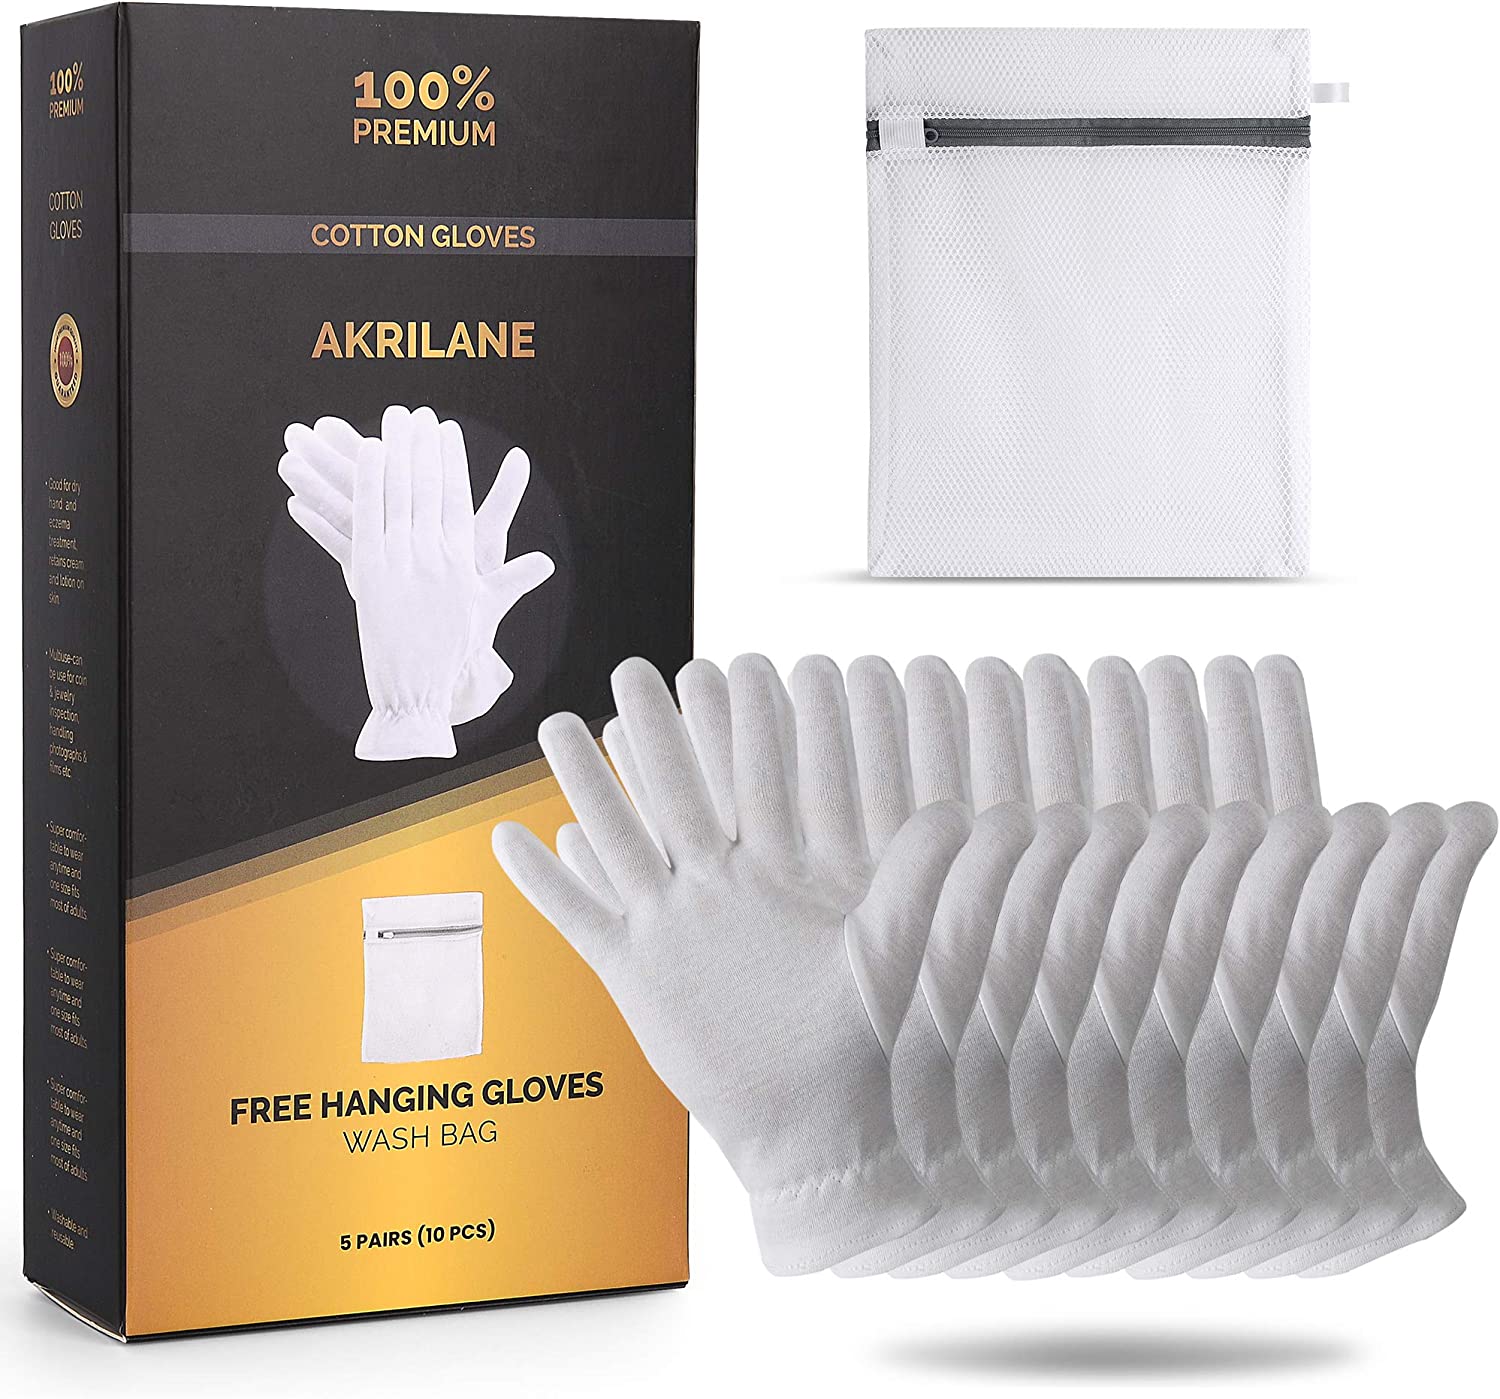 Akrilane - Cotton Gloves for Dry Hands, Moisturizing Gloves Overnight, Eczema Treatment, Skin Spa Therapy, Cosmetic Jewelry Inspection Premium Quality - One Size Fits All - Akrilane